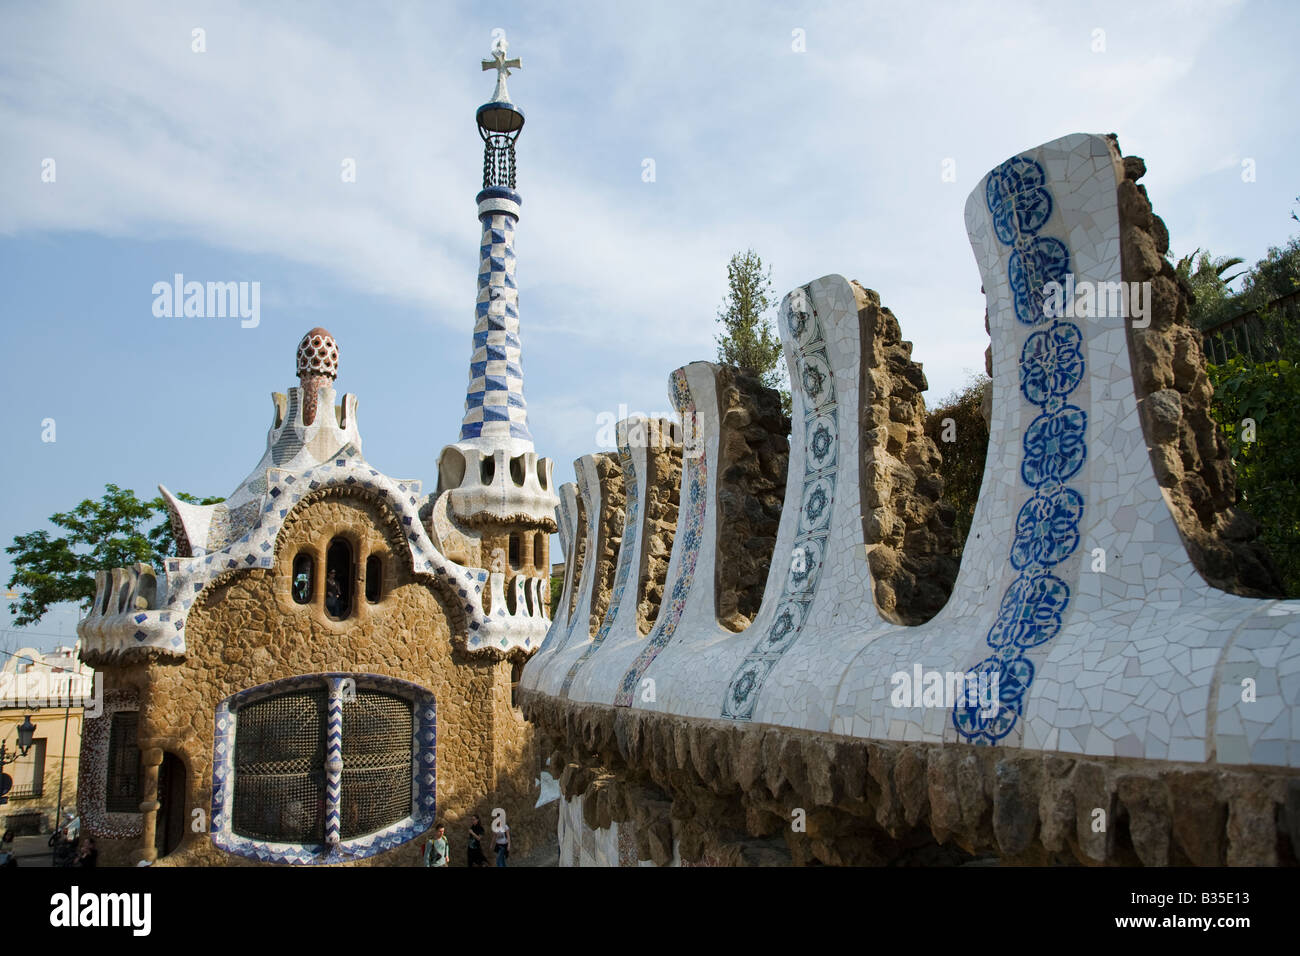 SPAIN Barcelona Mosaic patterns on building and columns in Parc Guell designed Antoni Gaudi architect Modernisme architecture Stock Photo